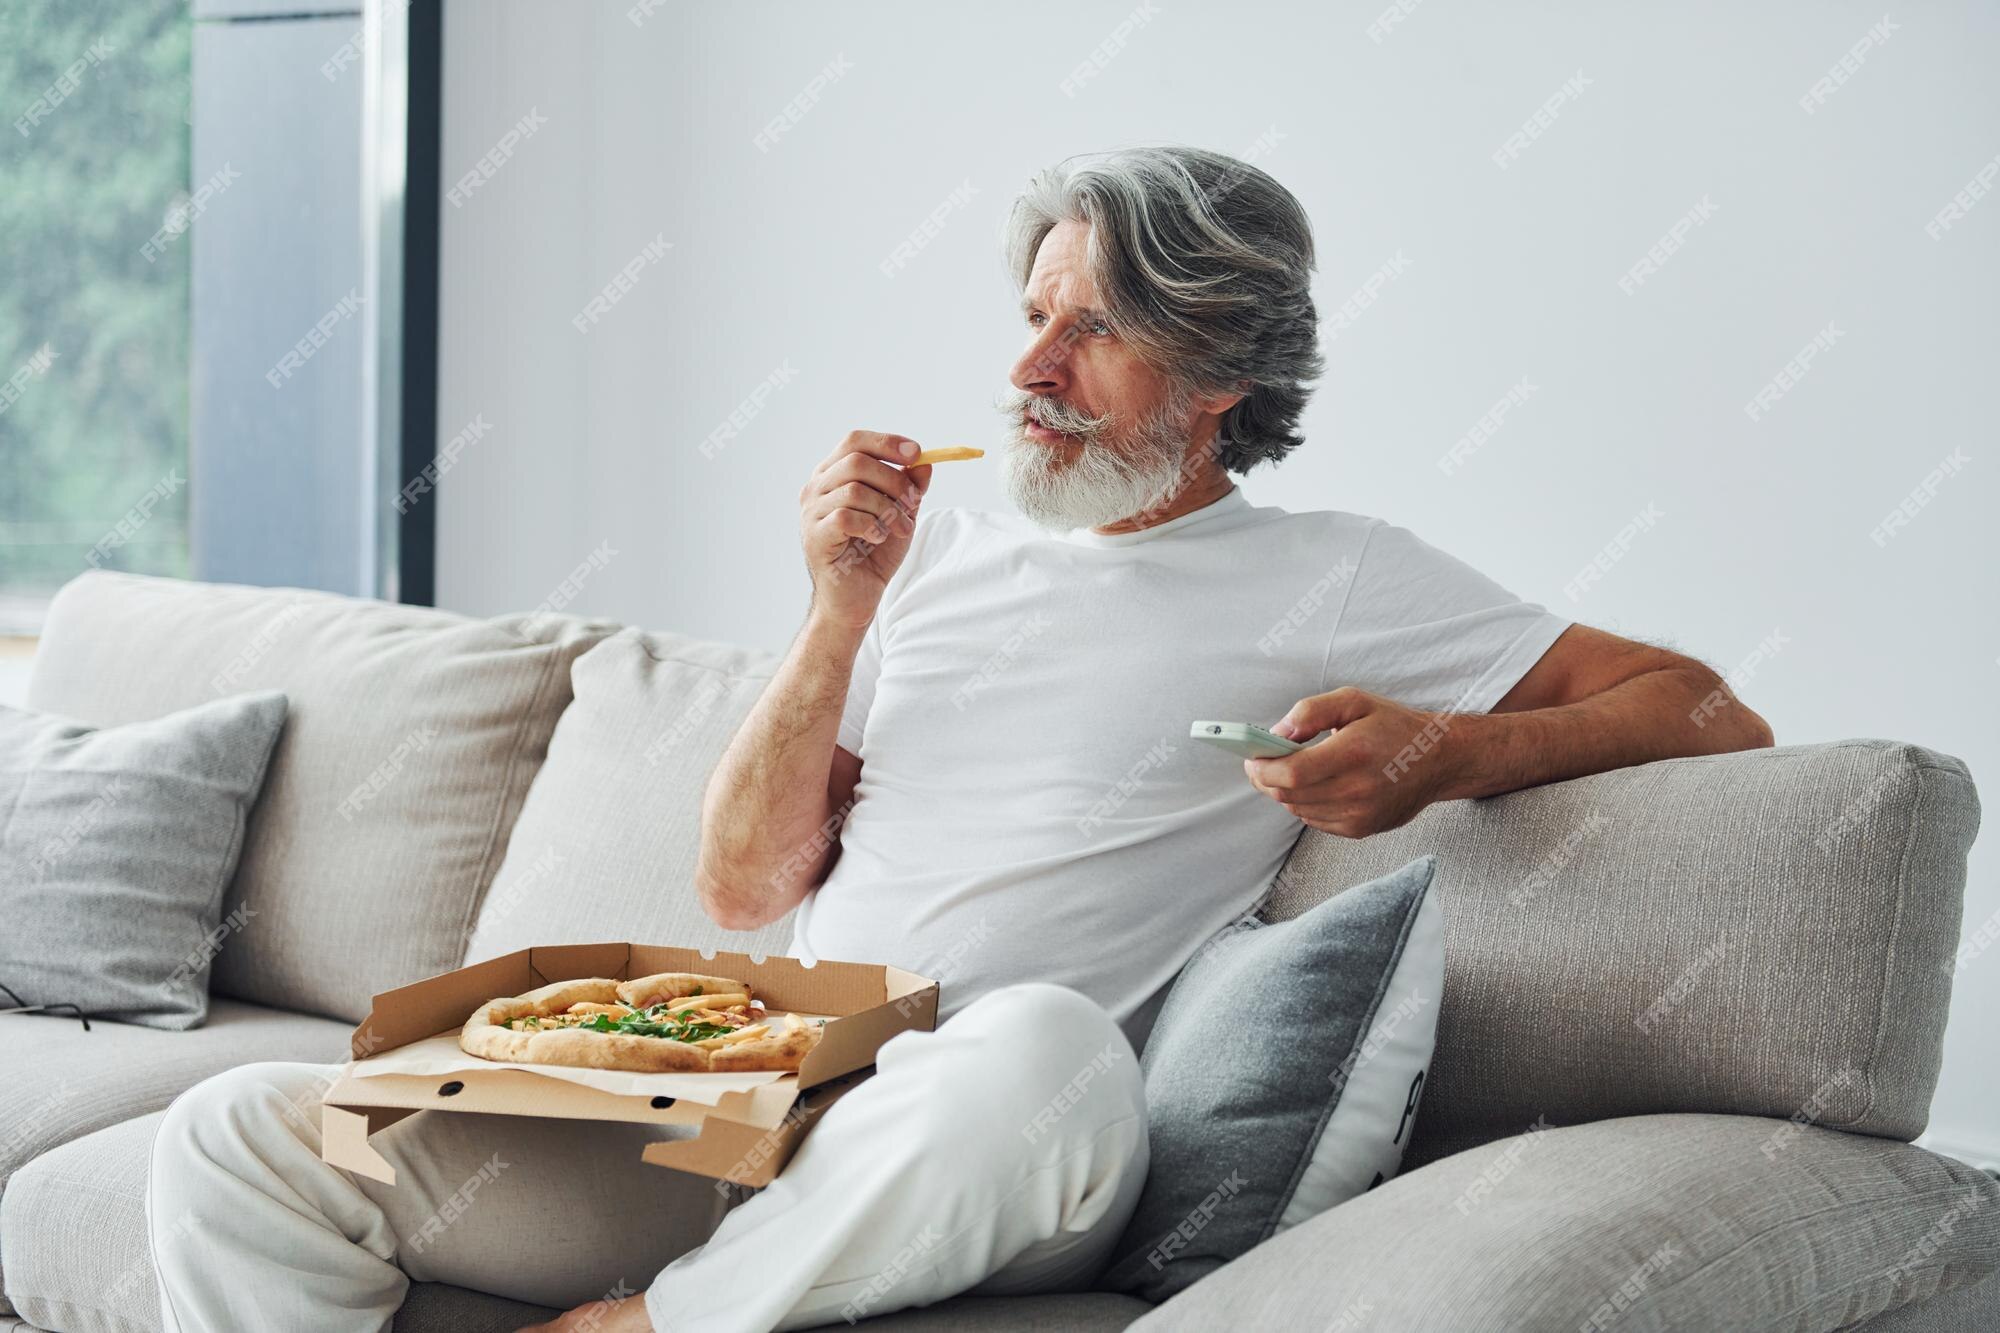 Premium Photo | Eats delicious pizza while watching tv show senior stylish  modern man with grey hair and beard indoors